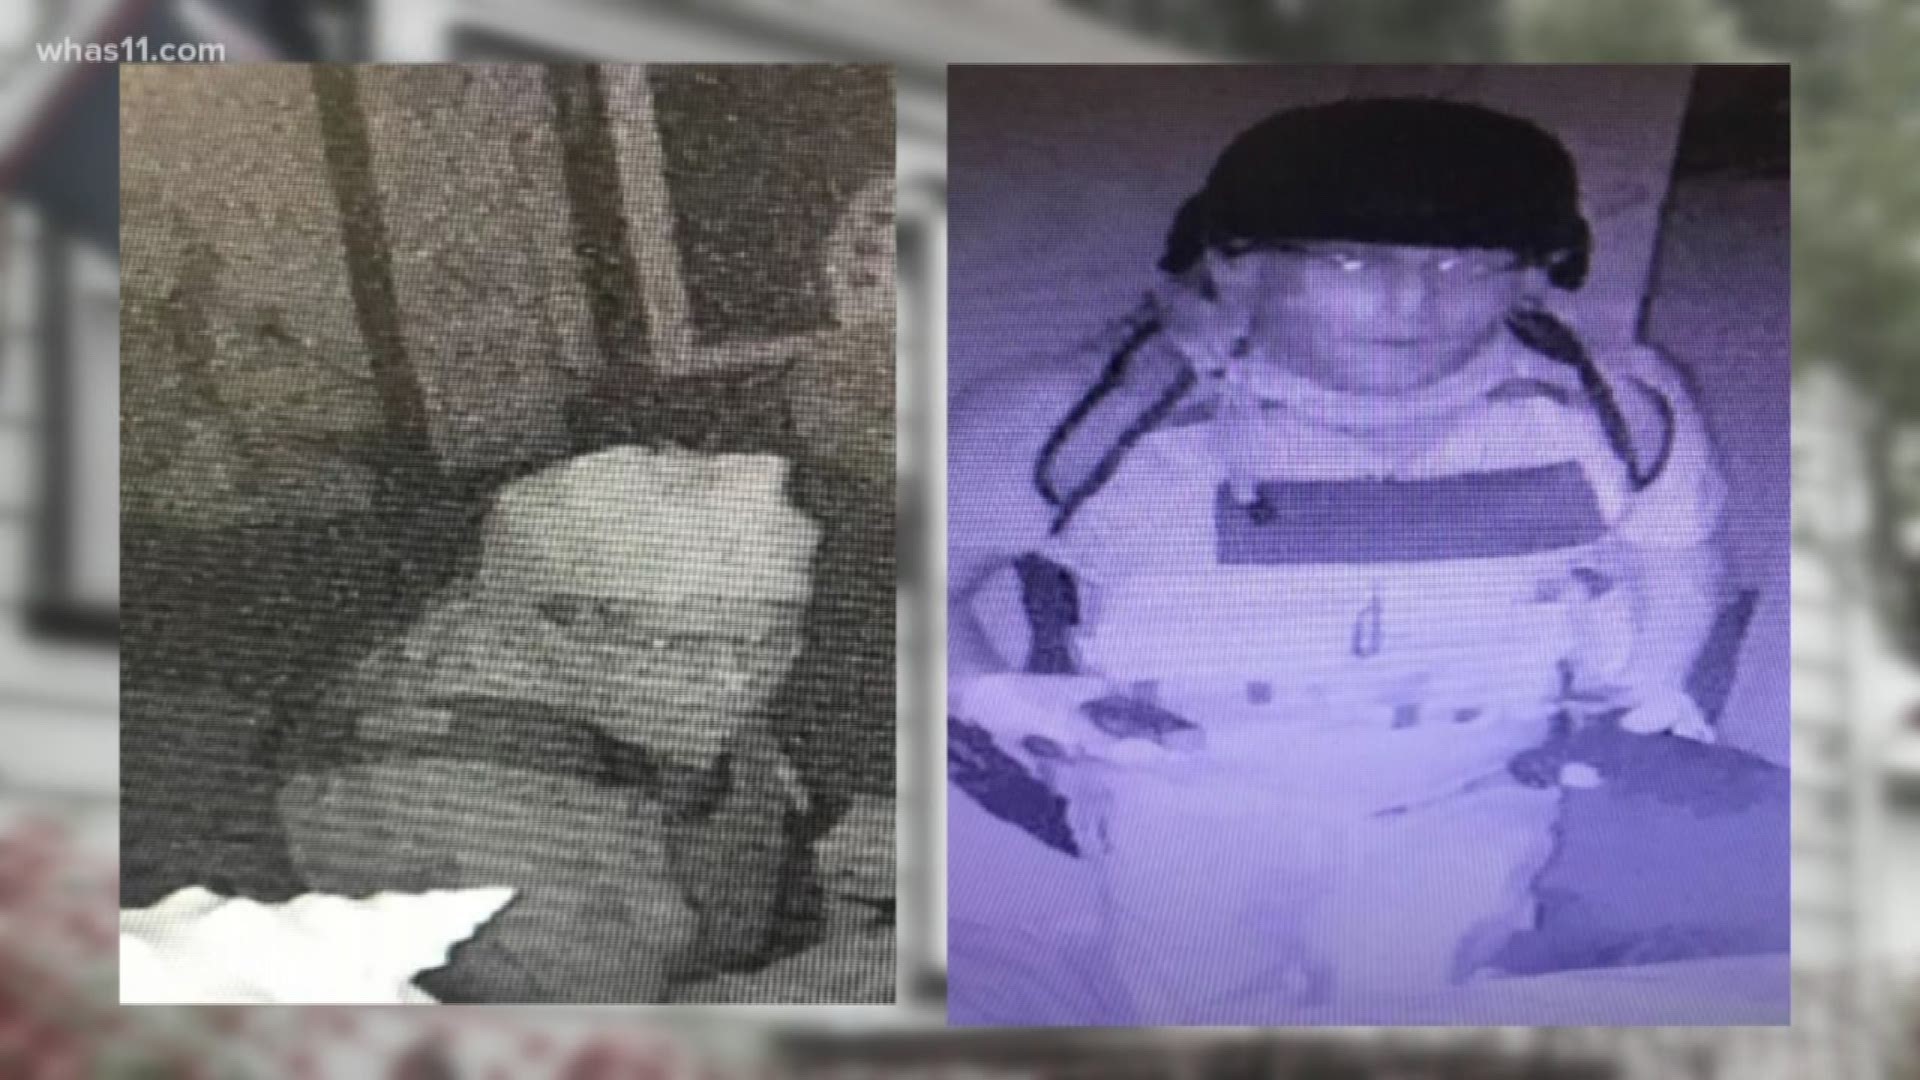 Police are looking for two men responsible for a June 18 armed home invasion